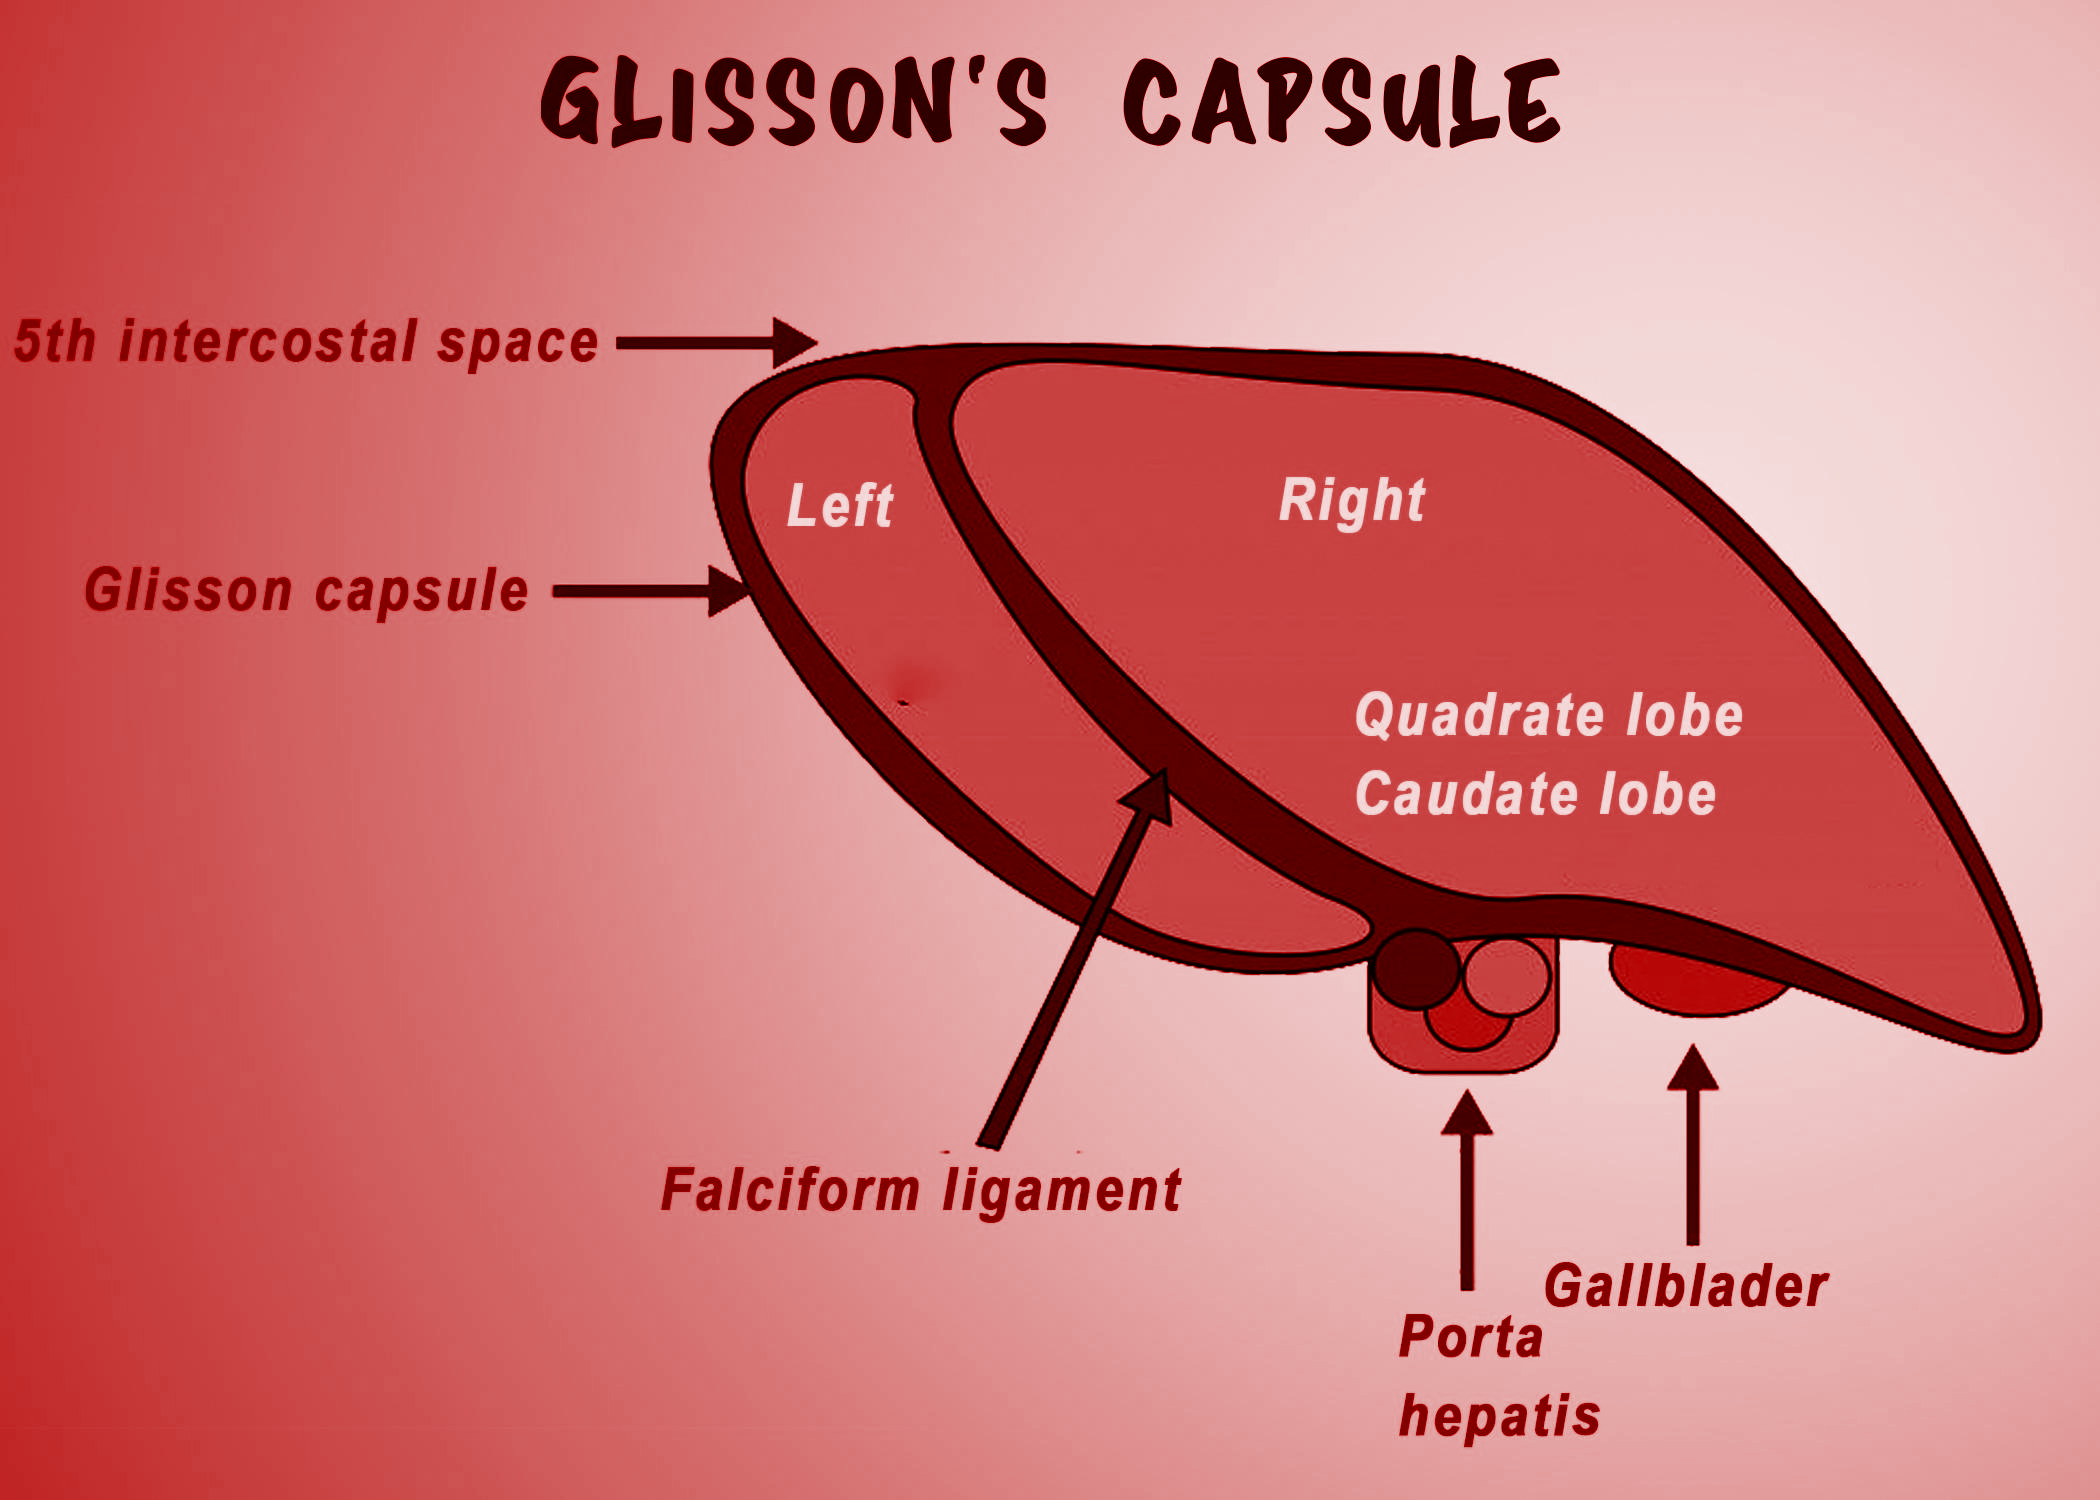 Glissons capsules are found in A Kidney of frog B Heart class 11